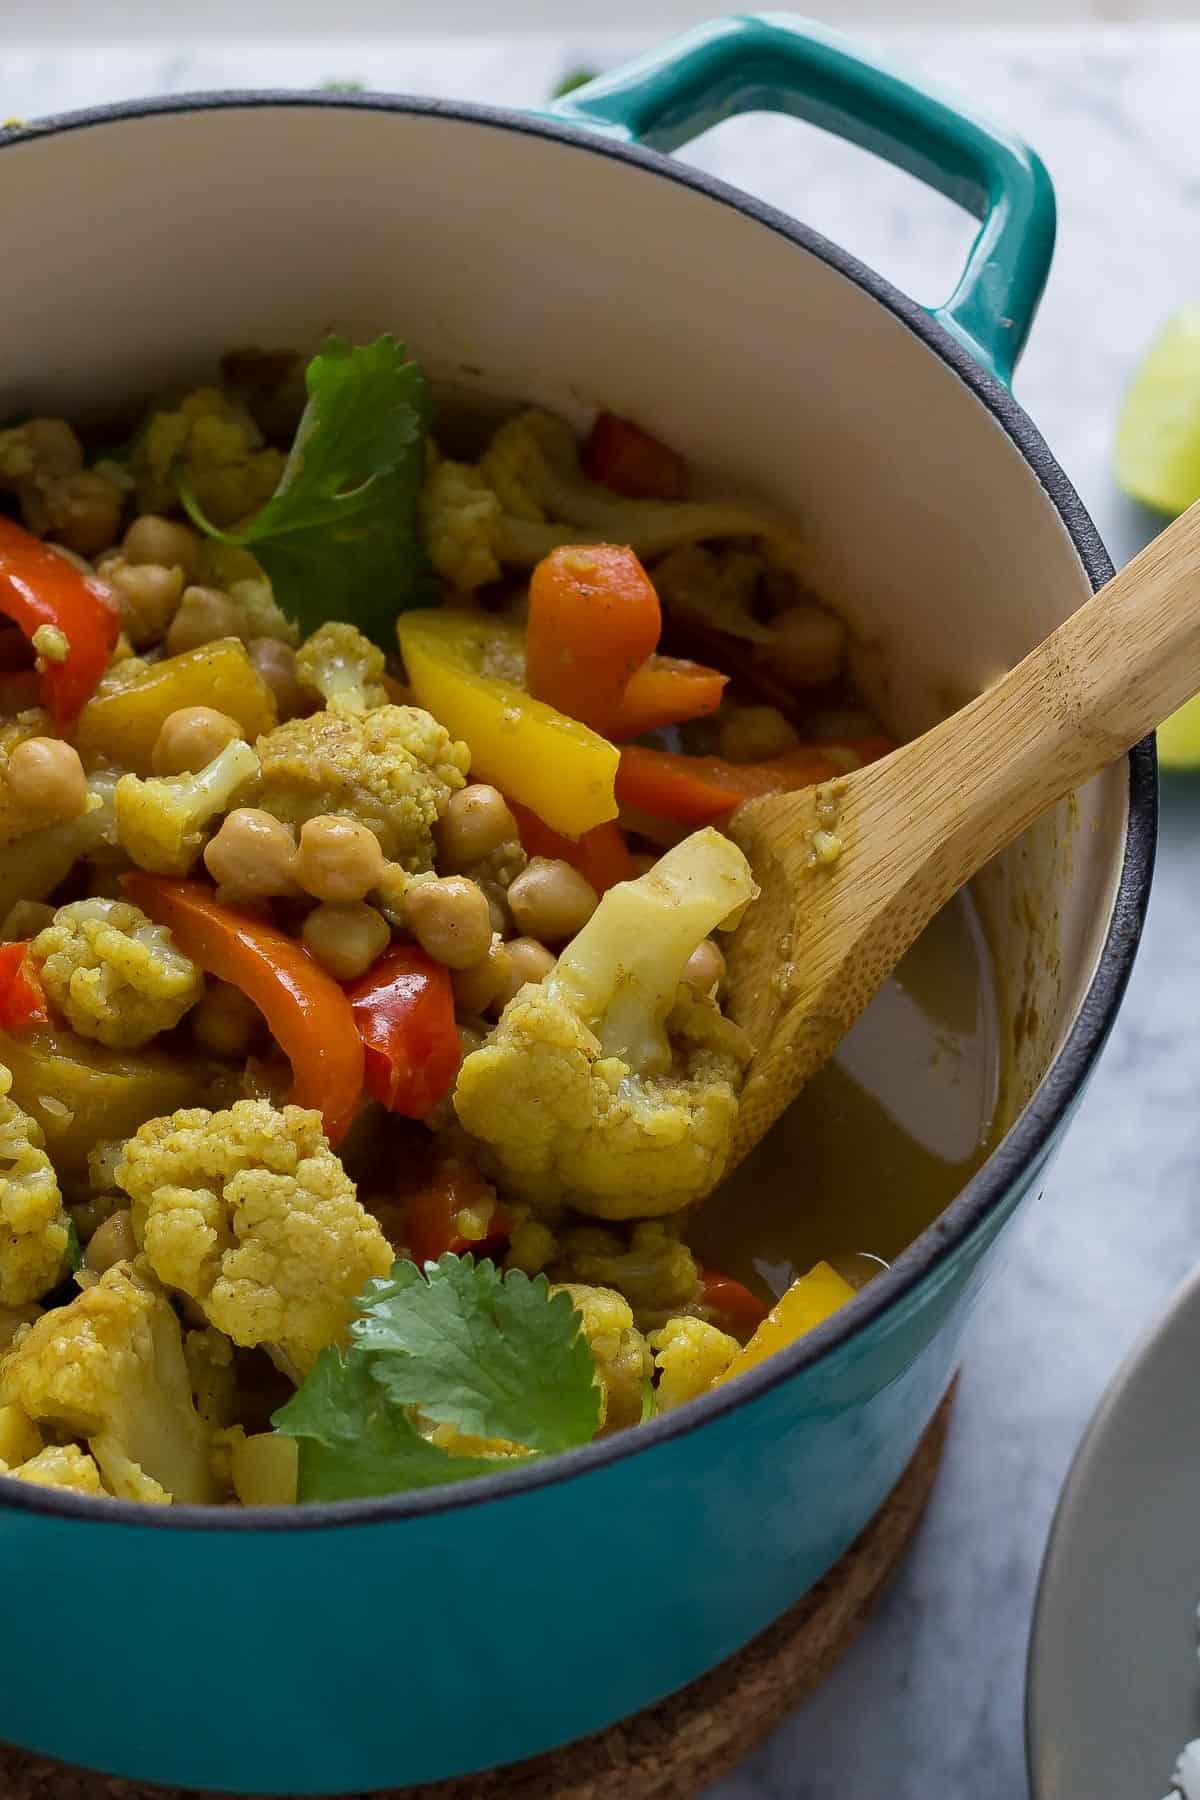 This chickpea & cauliflower vegan curry is bright and flavorful, and is easy enough for a week-night dinner!